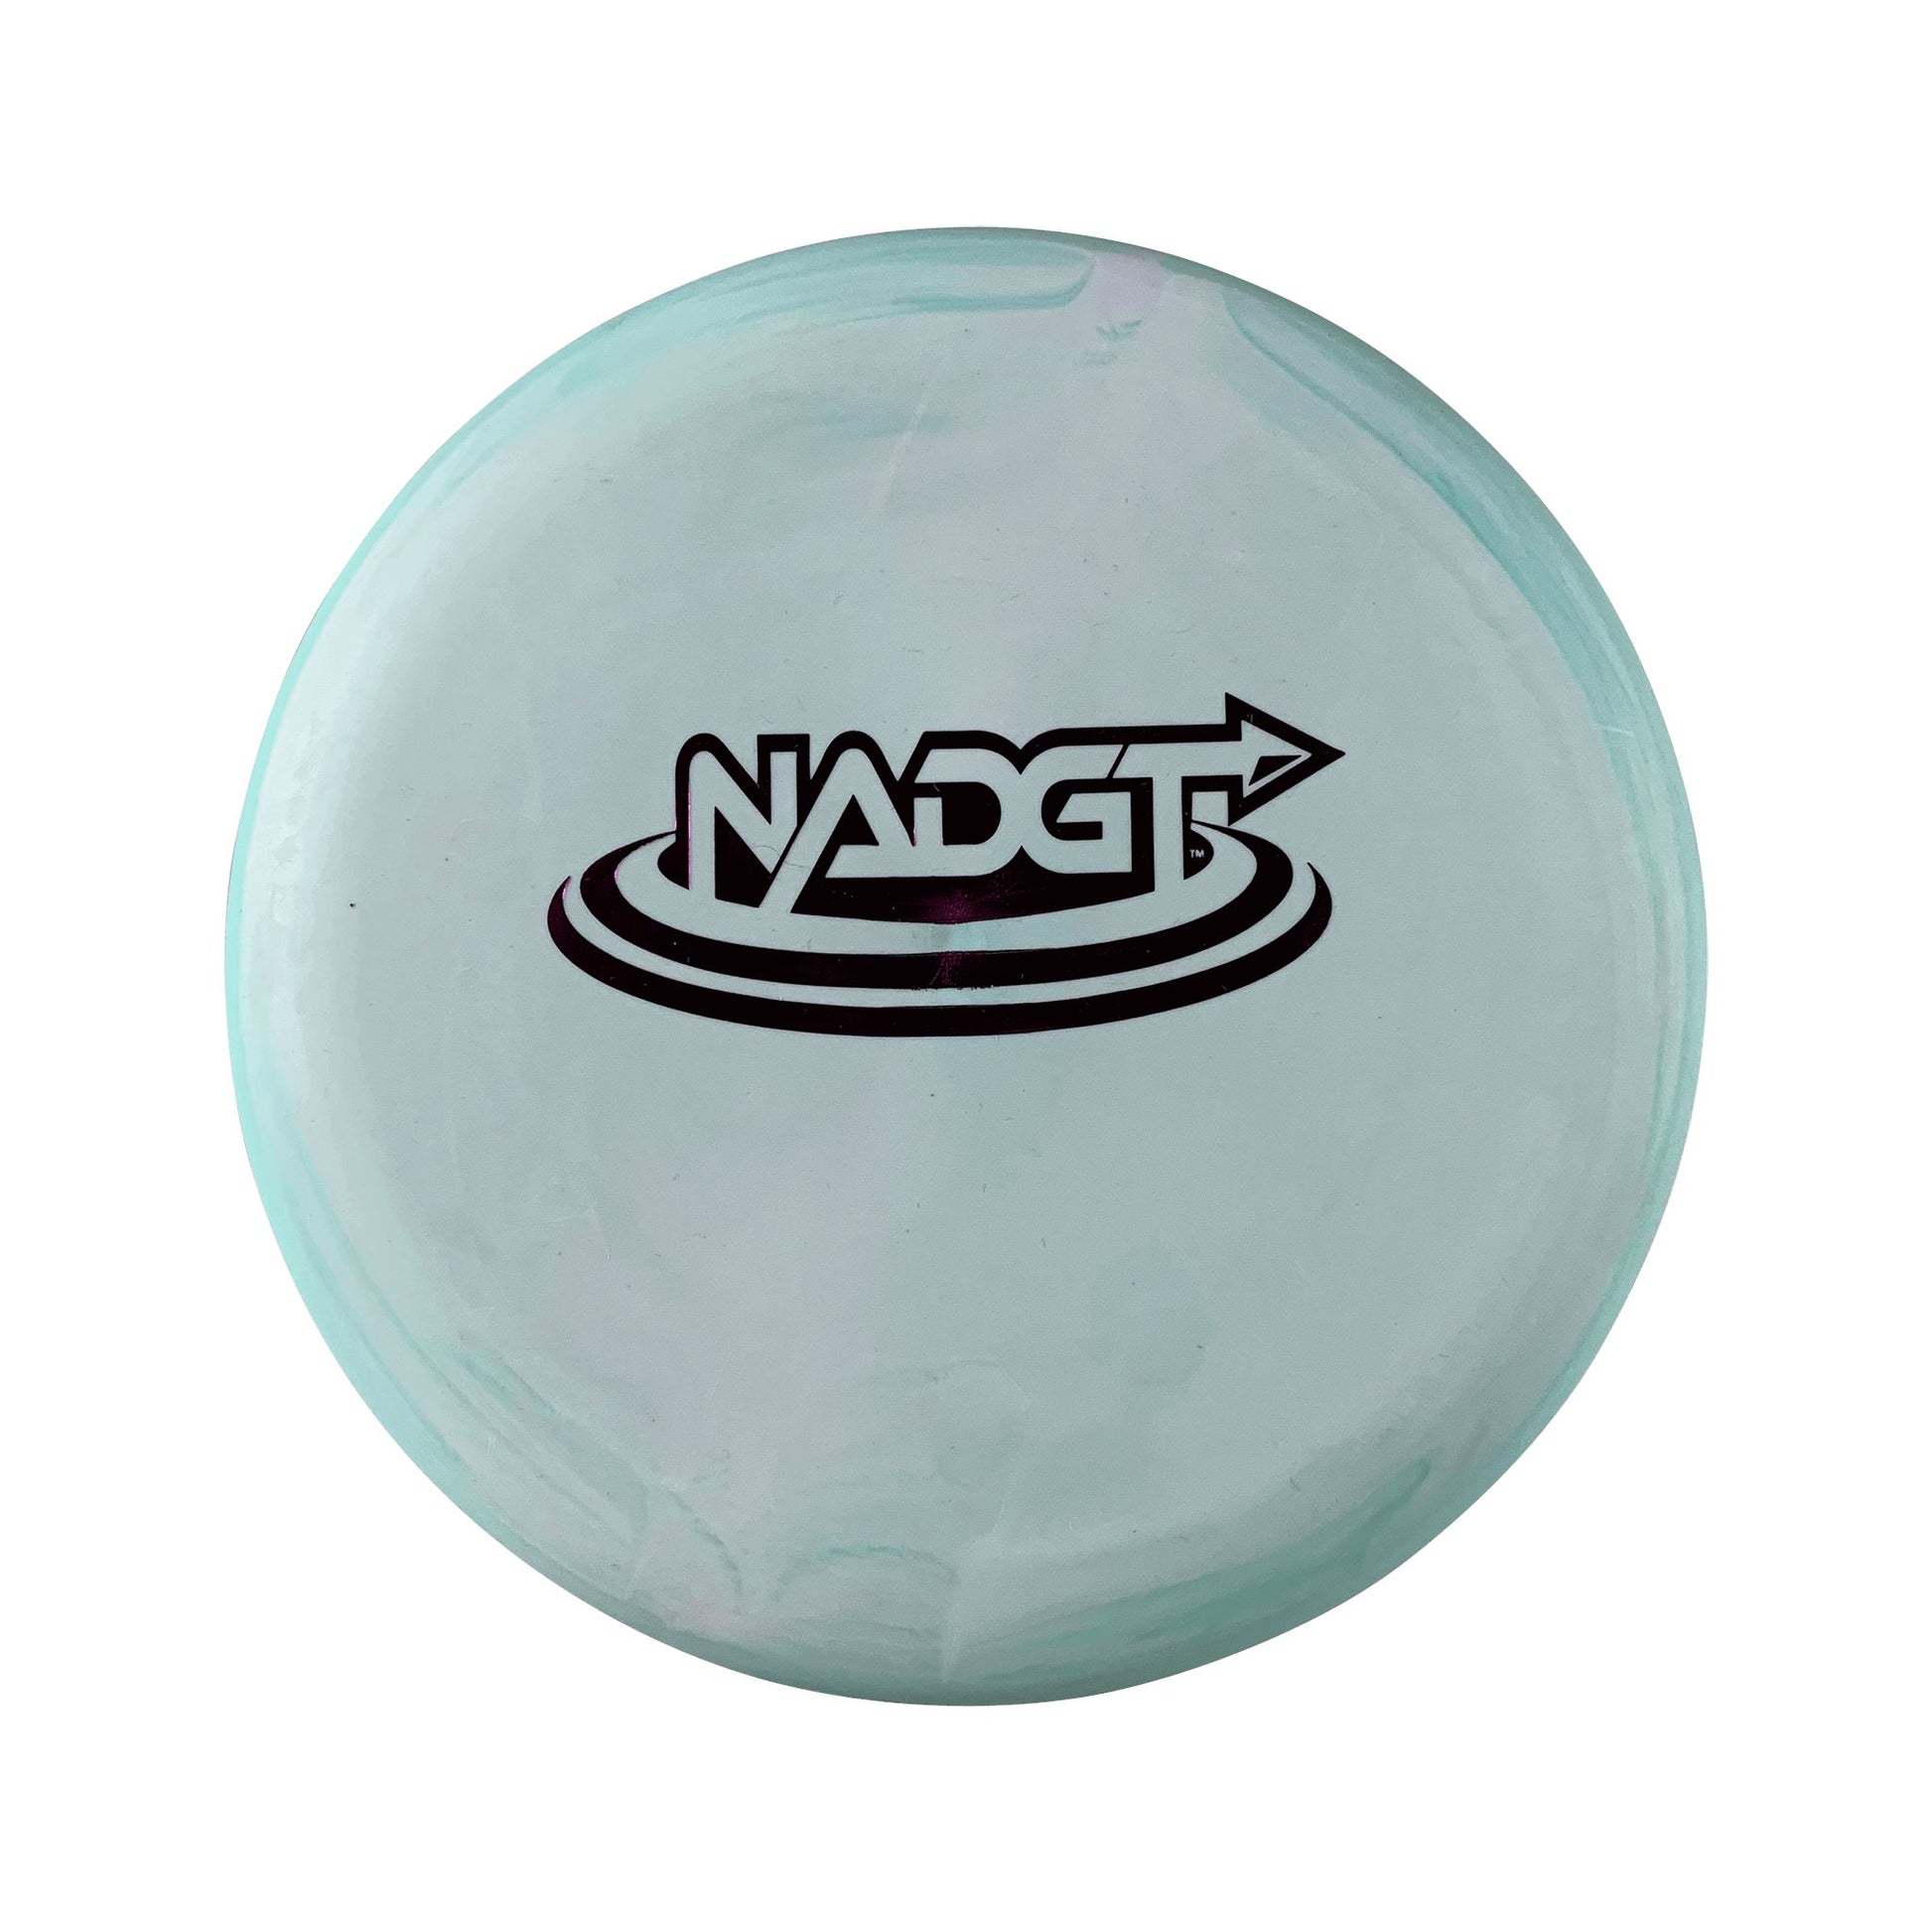 Gravity Prowler - NADGT Stamp Disc Legacy teal 175 